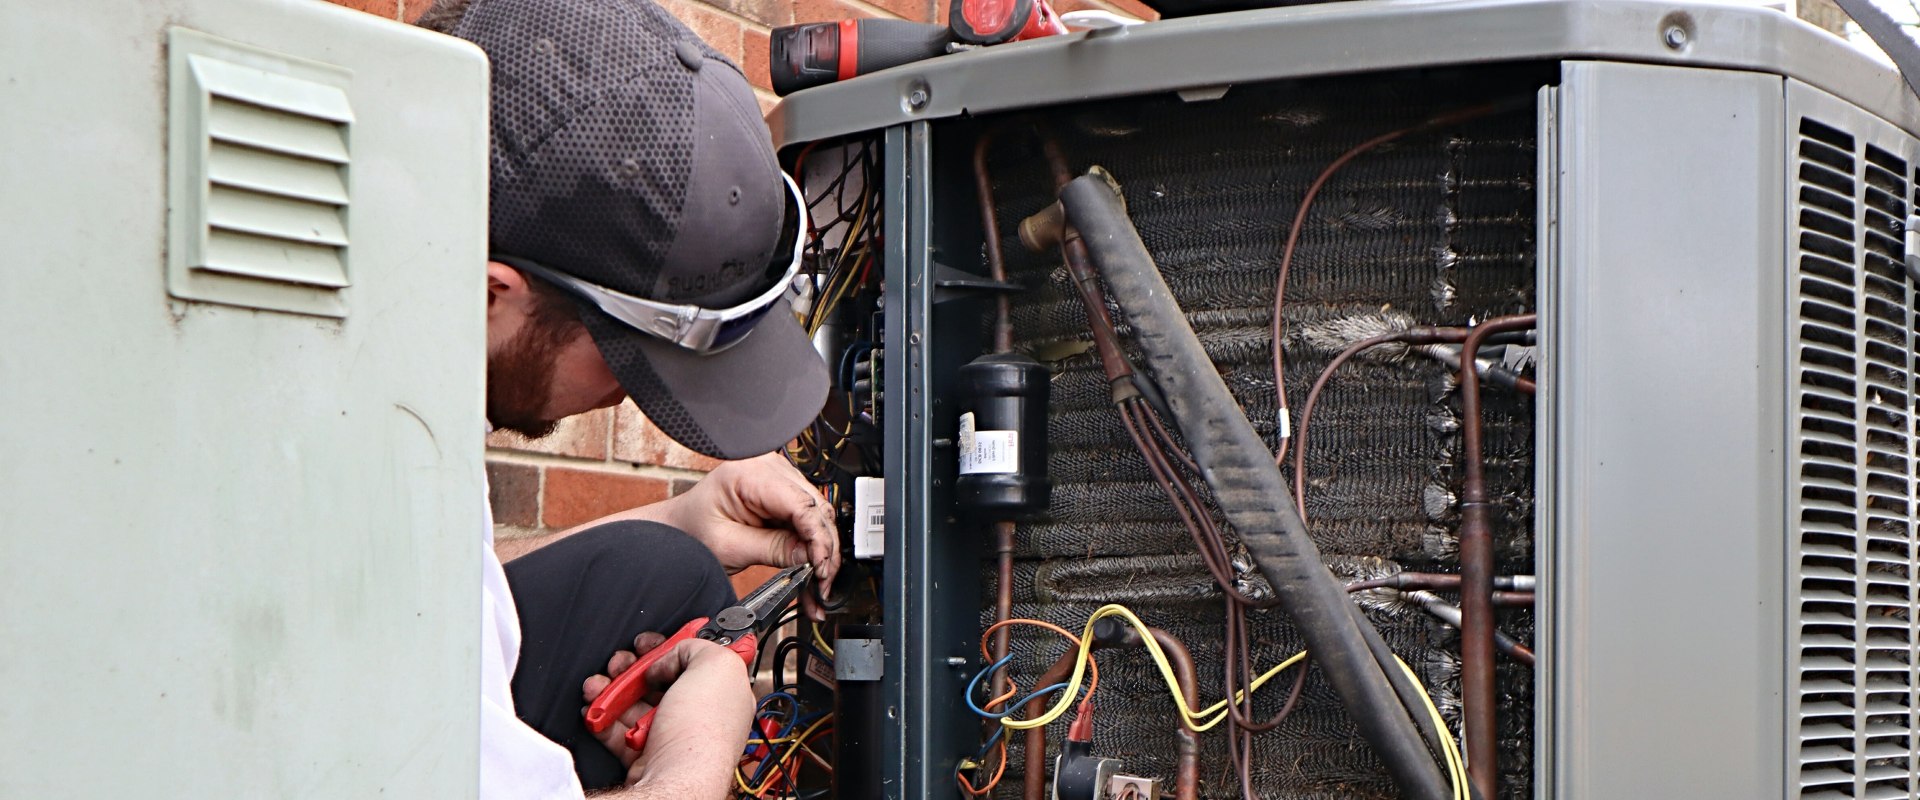 Is furnace repair covered by homeowners insurance?